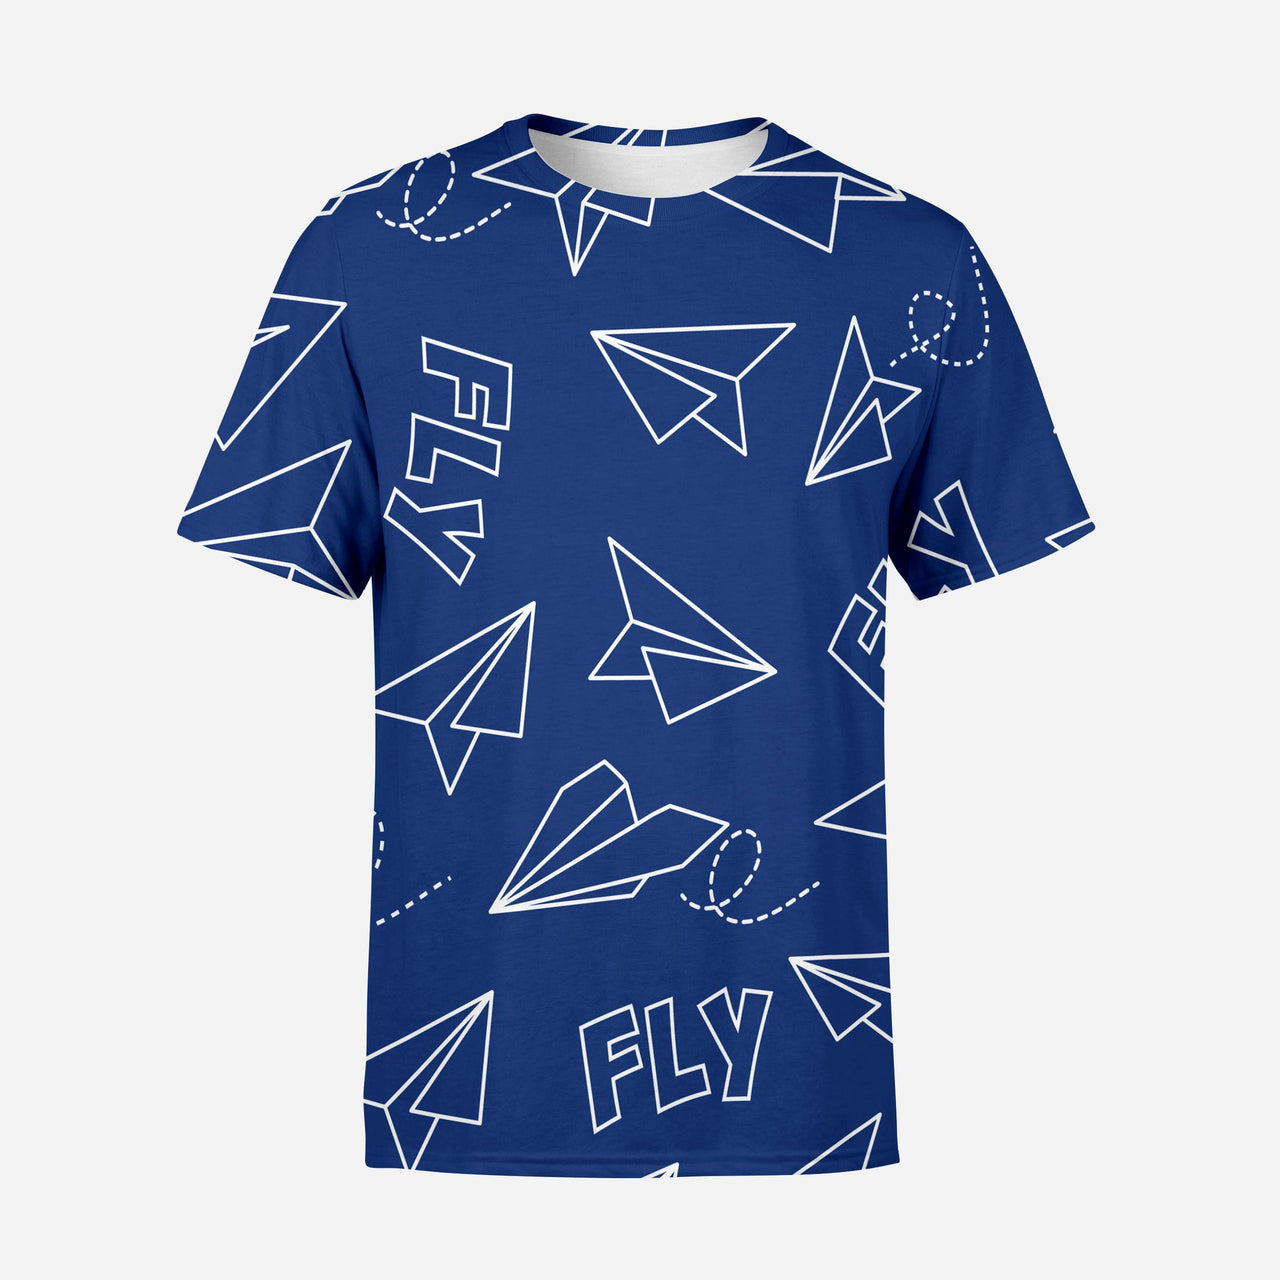 Paper Airplane & Fly (Blue) Designed 3D T-Shirts